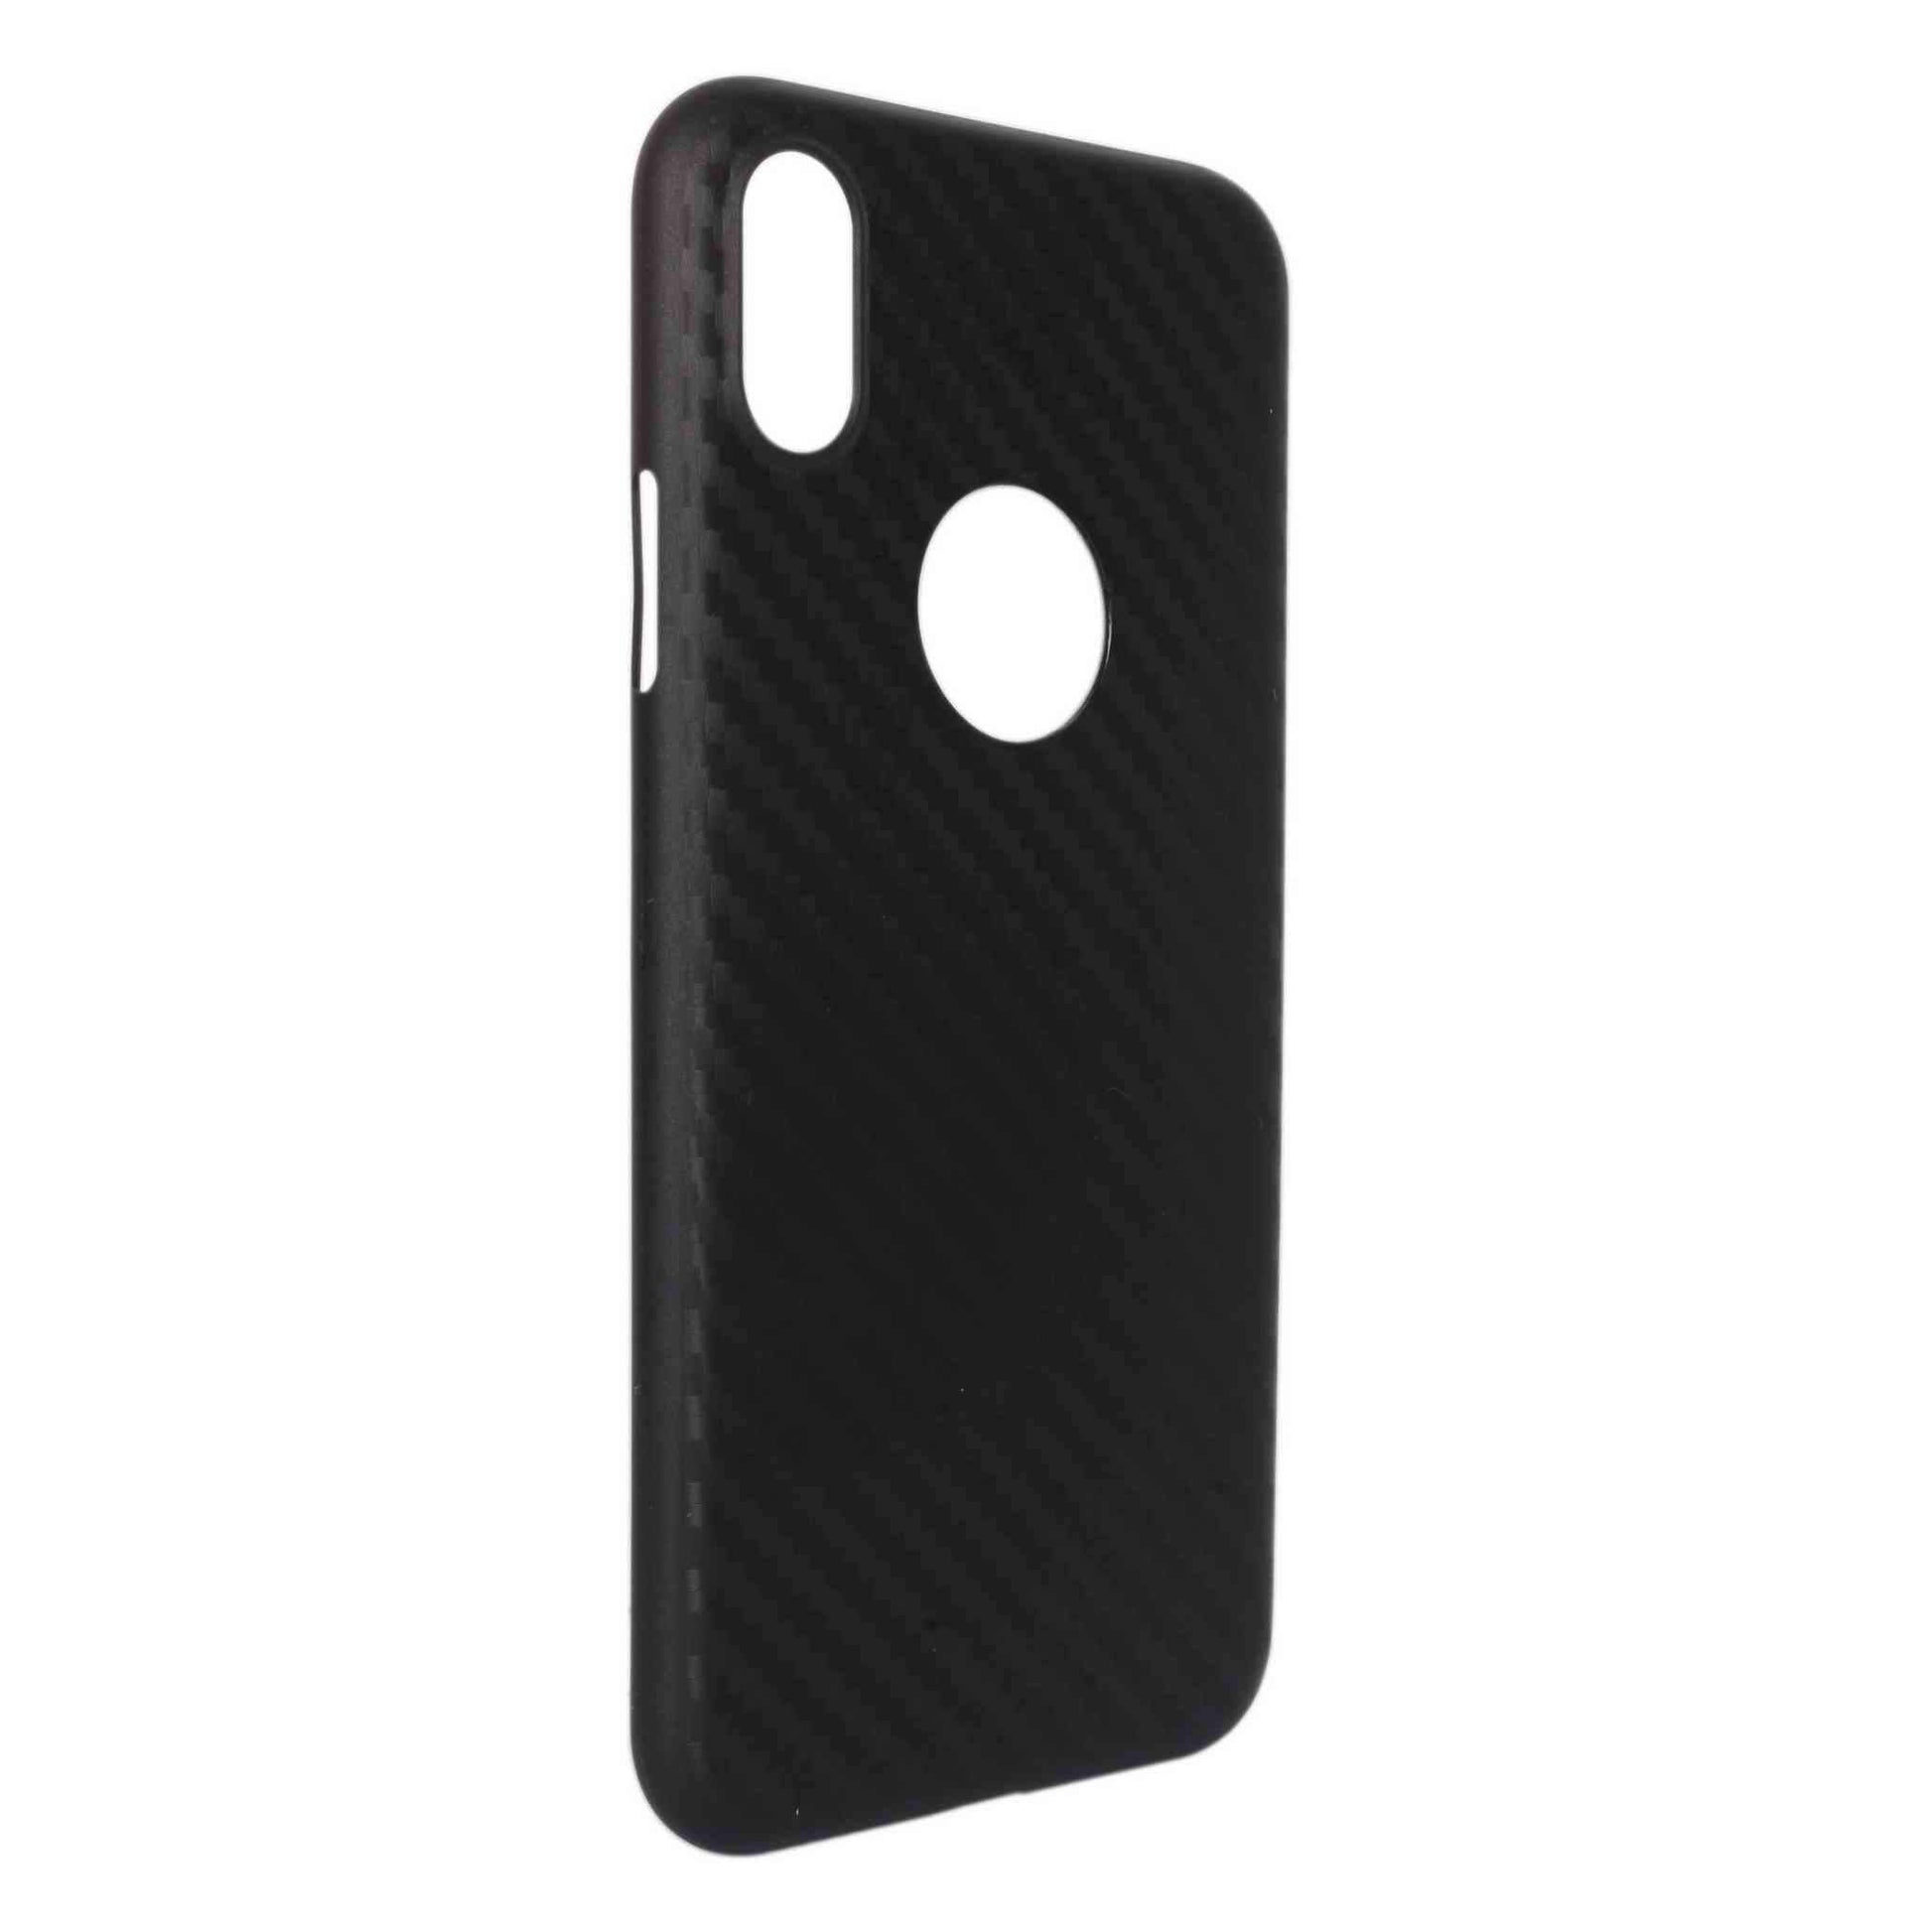 Indian Petals Polycarbonate 3D Pattern Protective Mobile Back Case Cover for Apple iPhone X, Black - Indian Petals